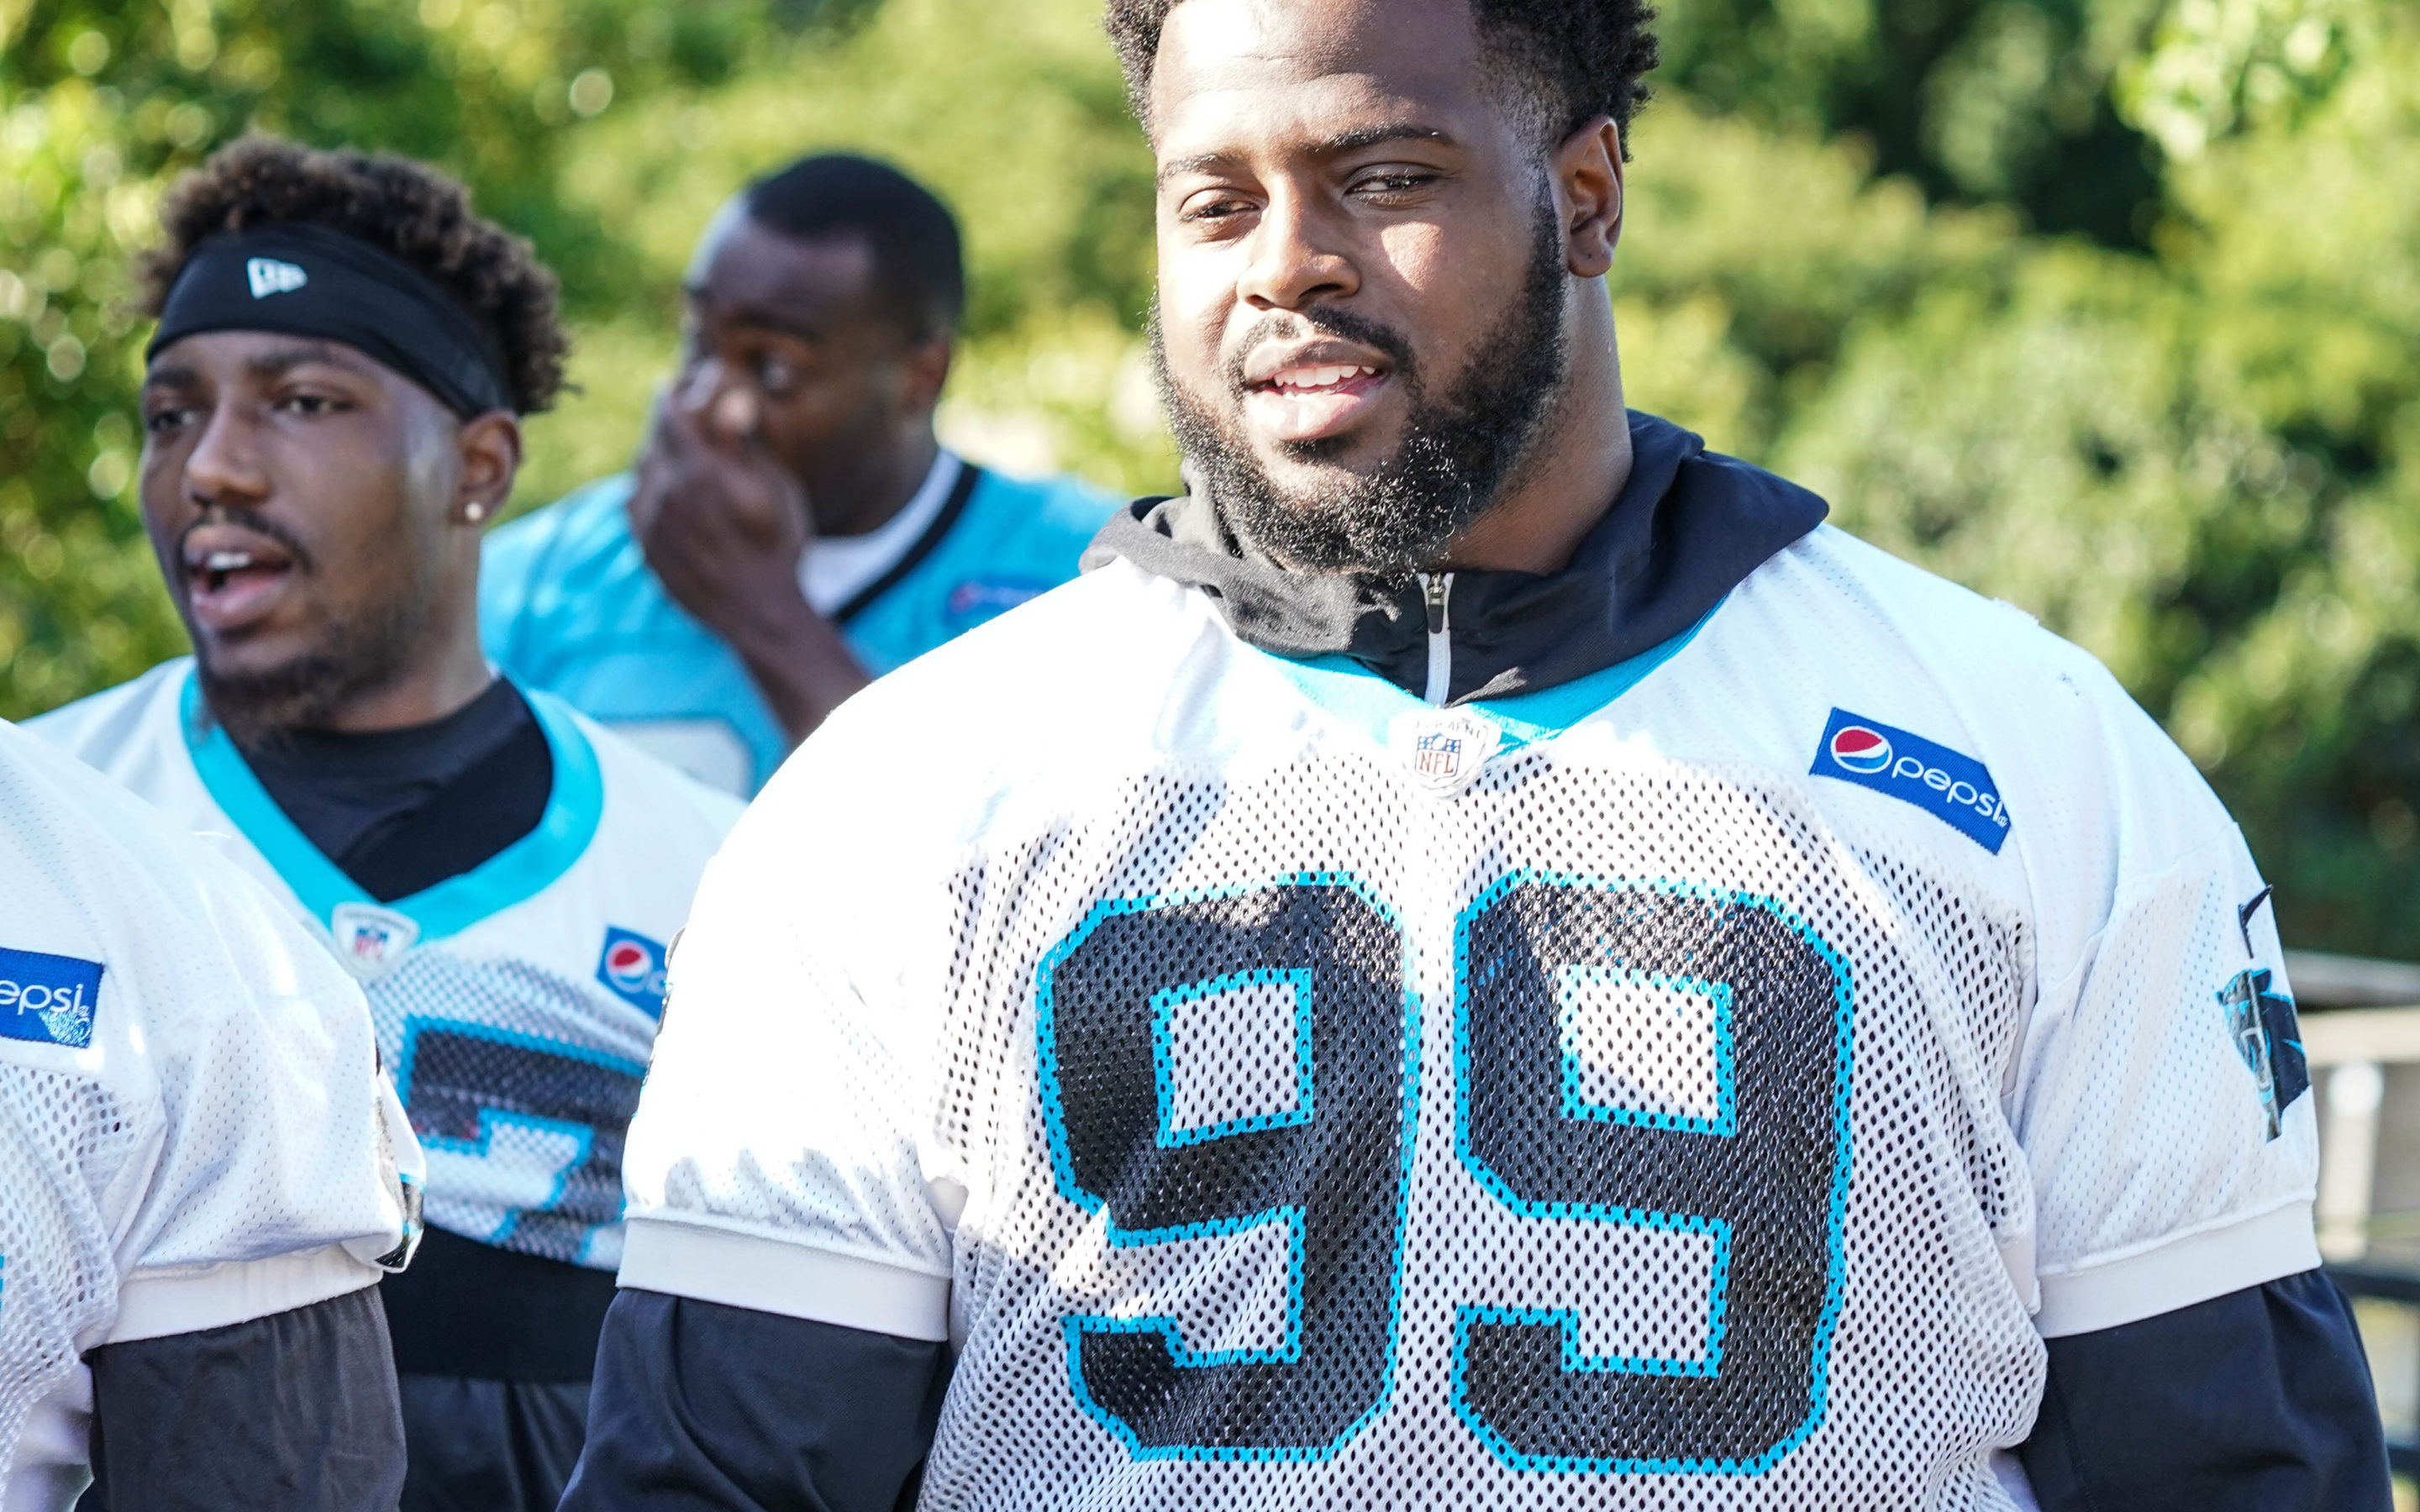 Panthers place DT Kawann Short on injured reserve